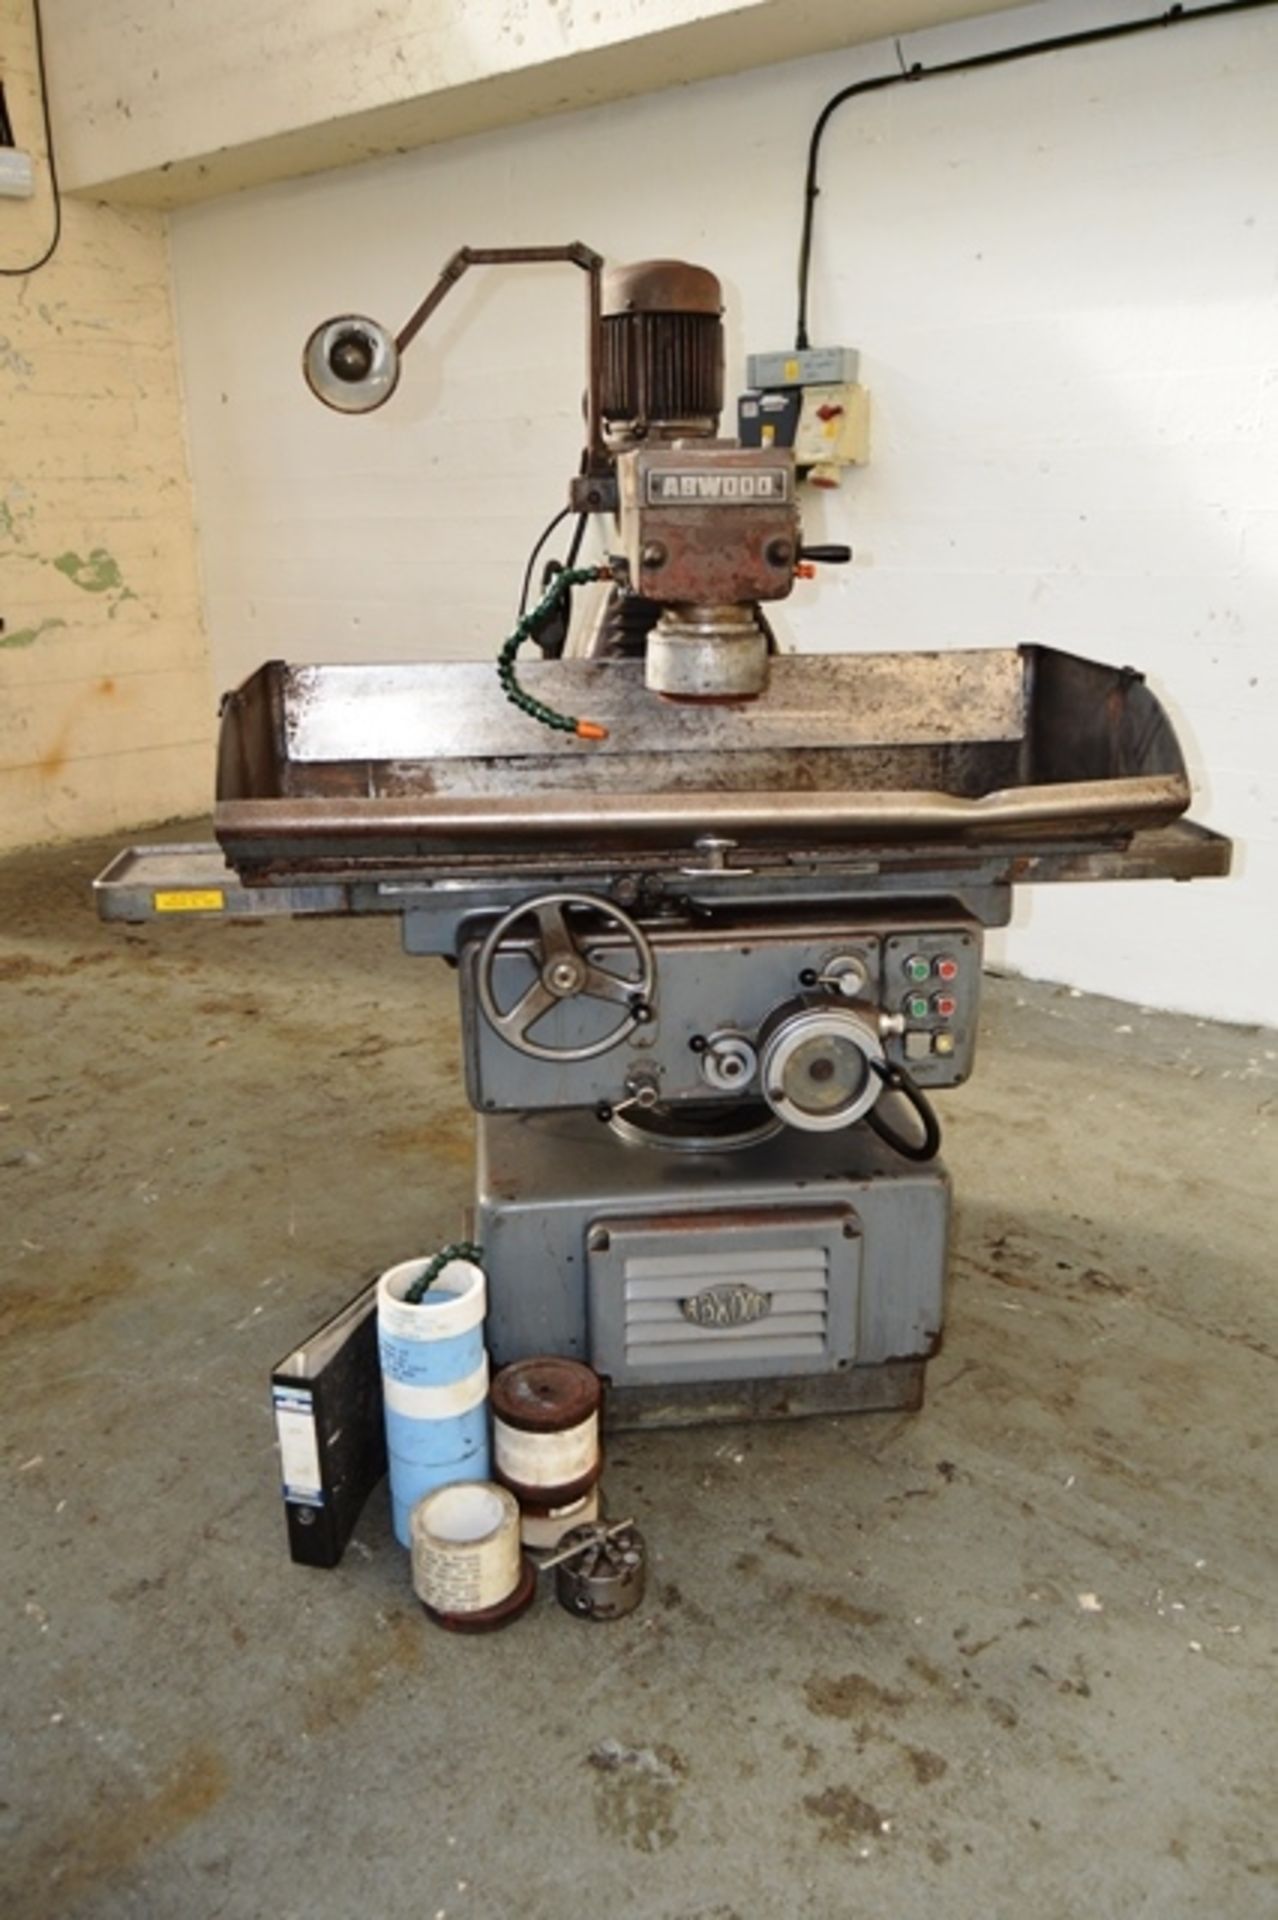 Abwood SG4 Cup Wheel Surface Grinder - Image 2 of 7